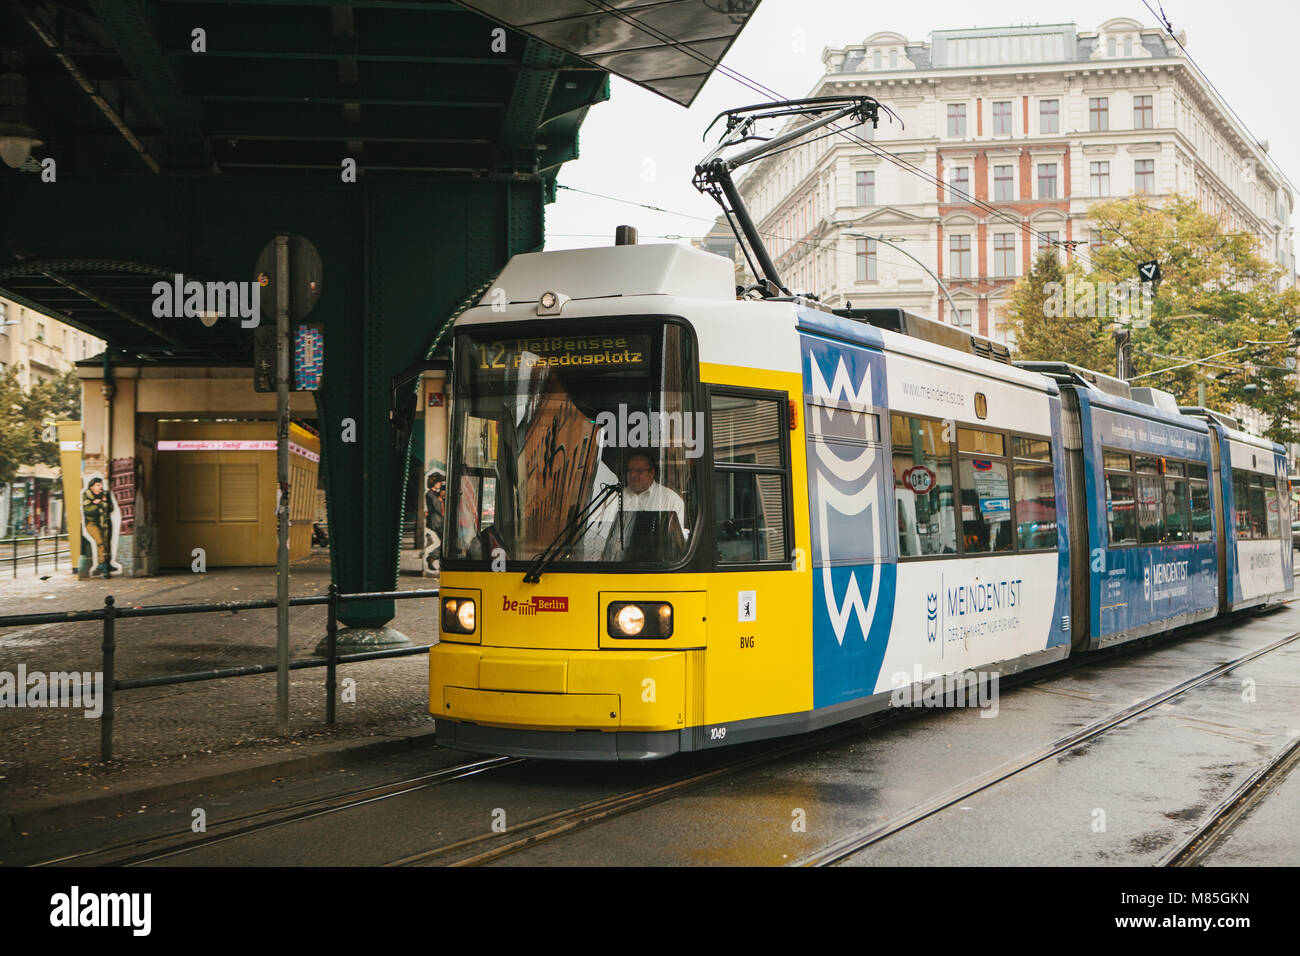 Berlin, October 2, 2017: City public transport in Germany. Beautiful black and yellow train stopped at stop on the background of an old building Stock Photo